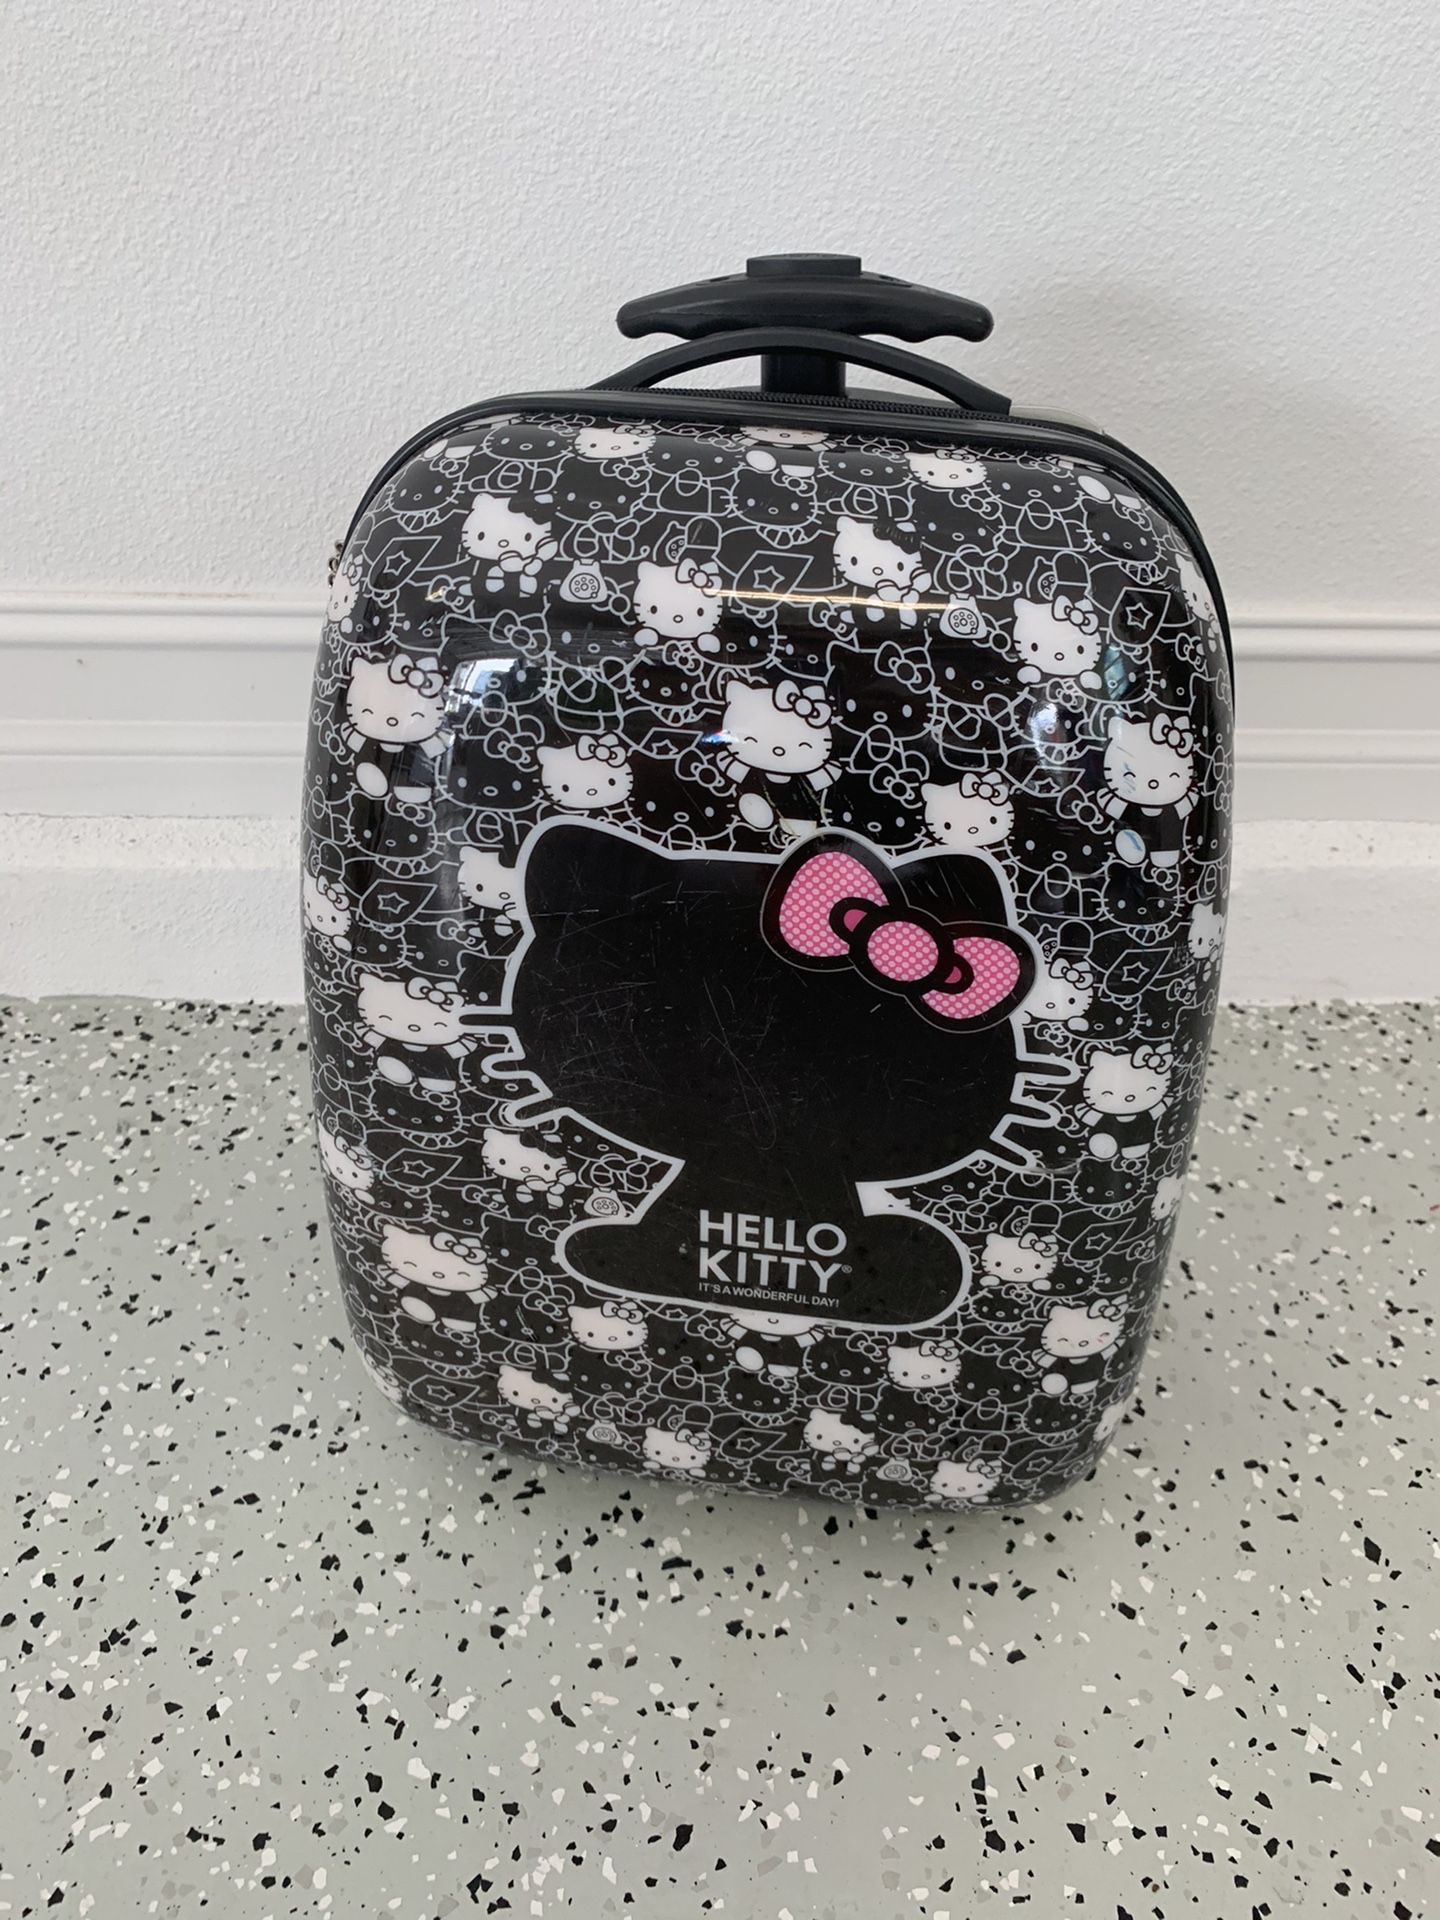 Hello Kitty suitcase with wheels